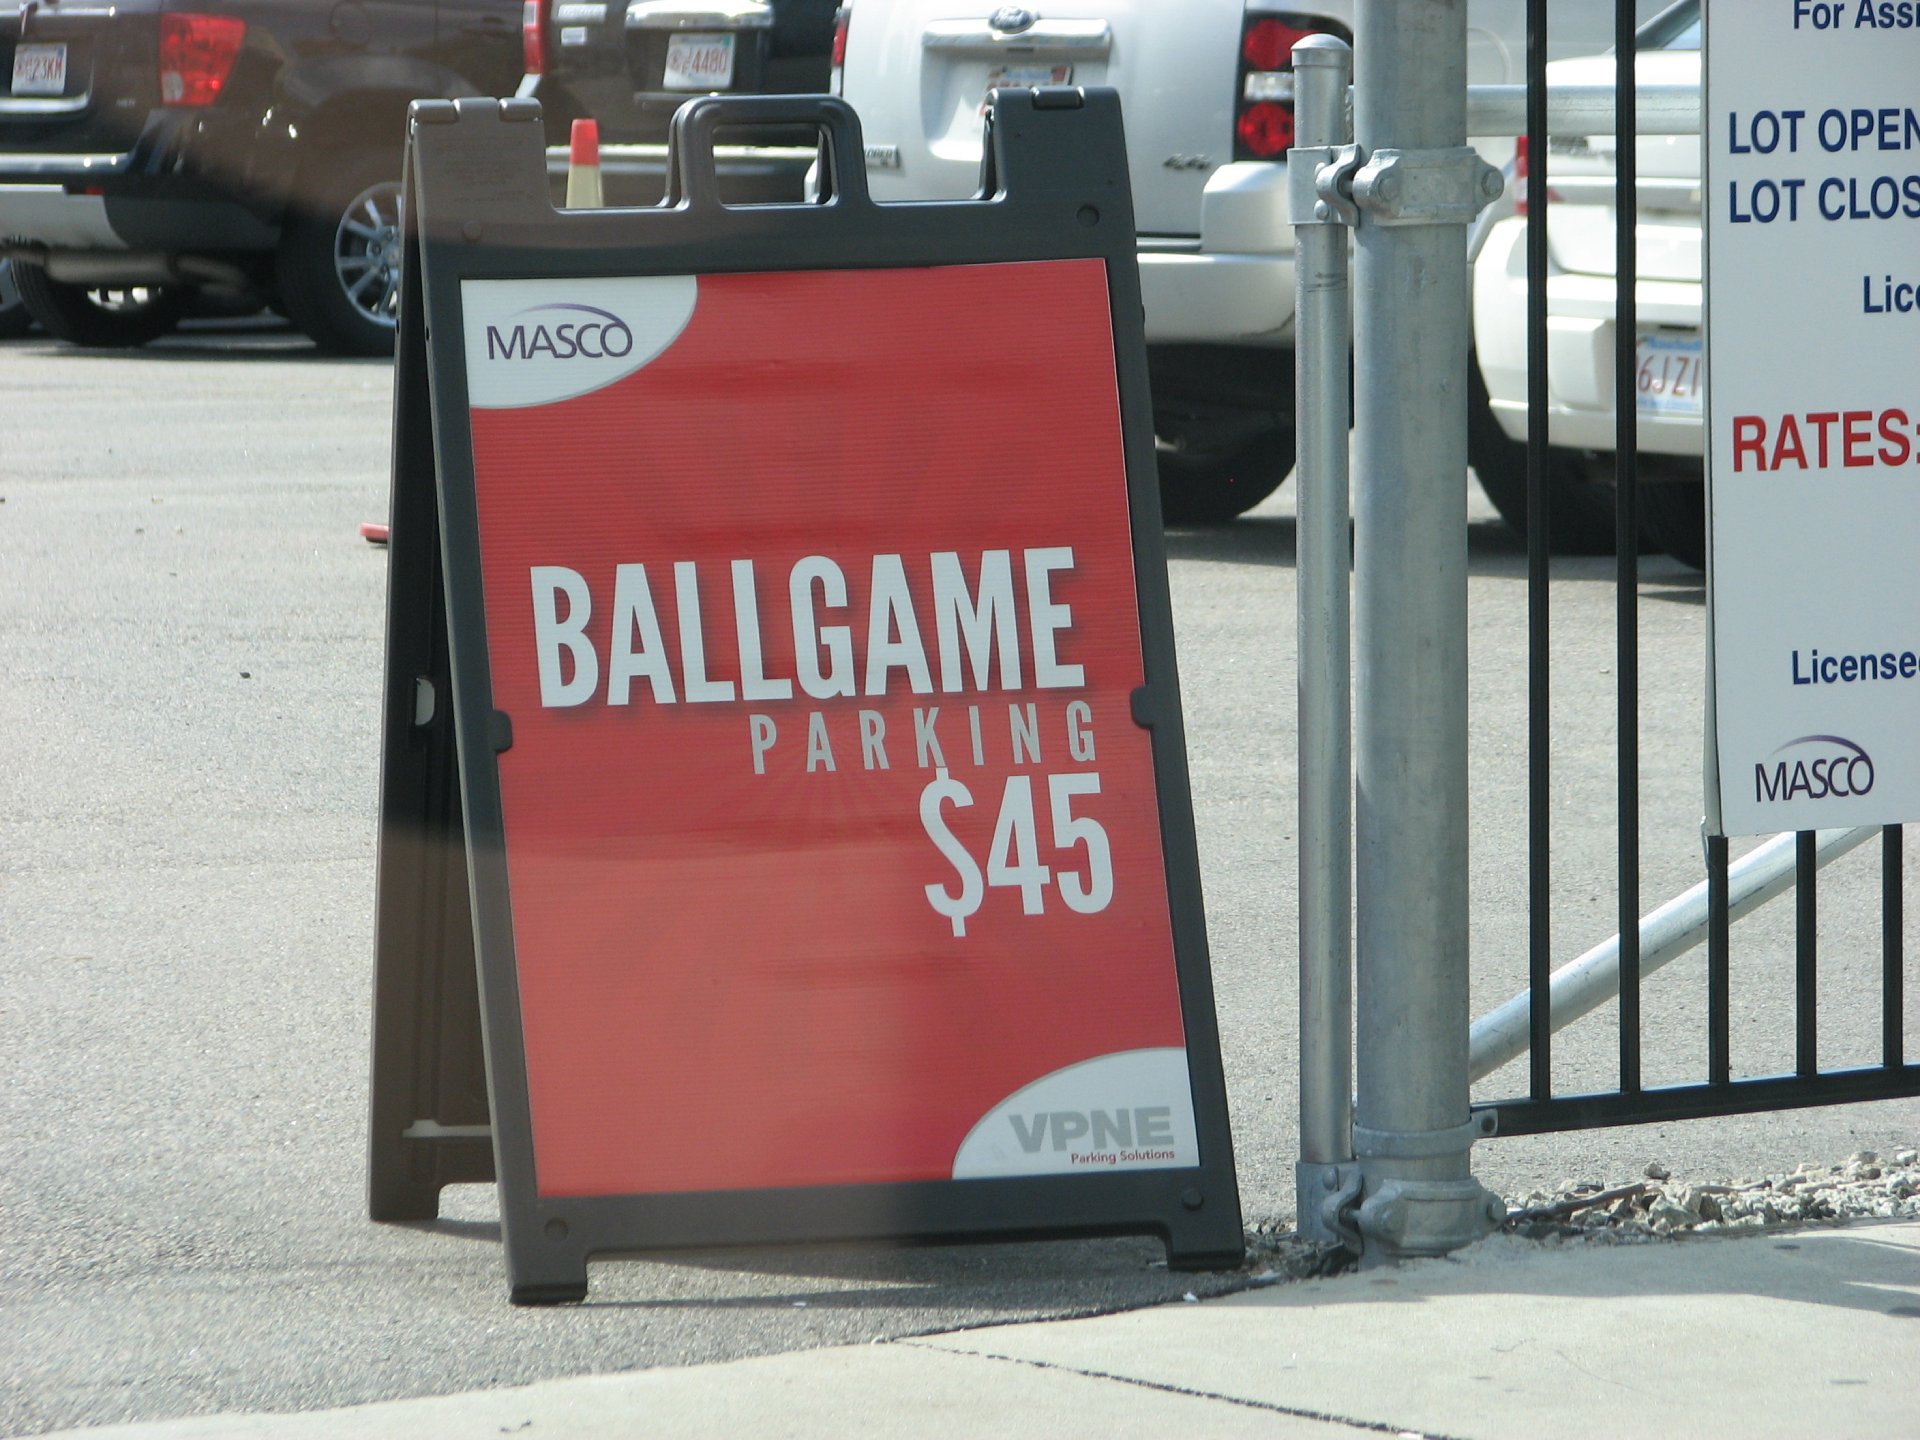 Parking at Fenway is expensive, especially on the blocks around the ballpark.